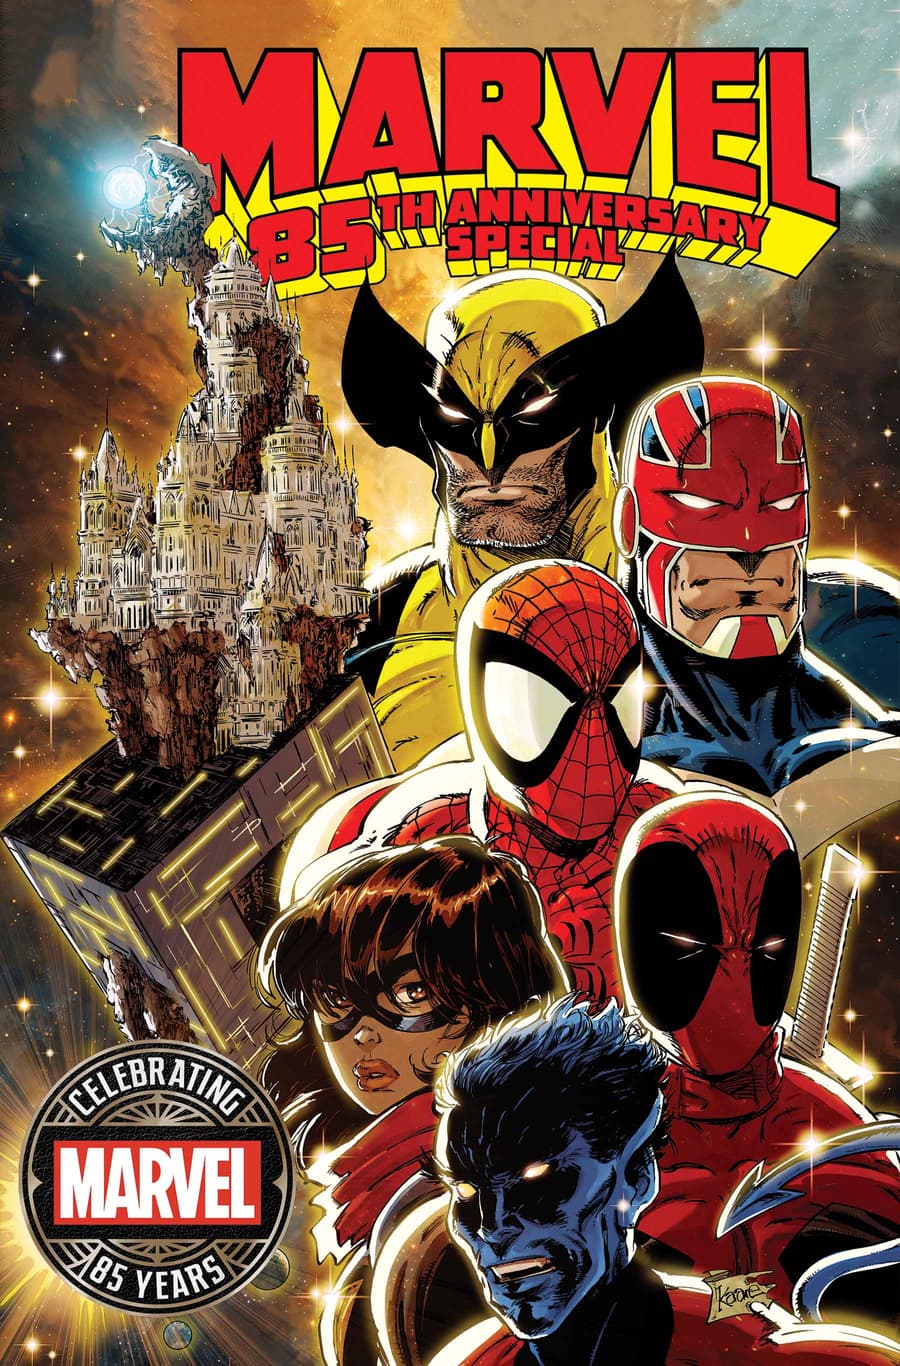 MARVEL 85TH ANNIVERSARY SPECIAL cover by Kaare Andrews